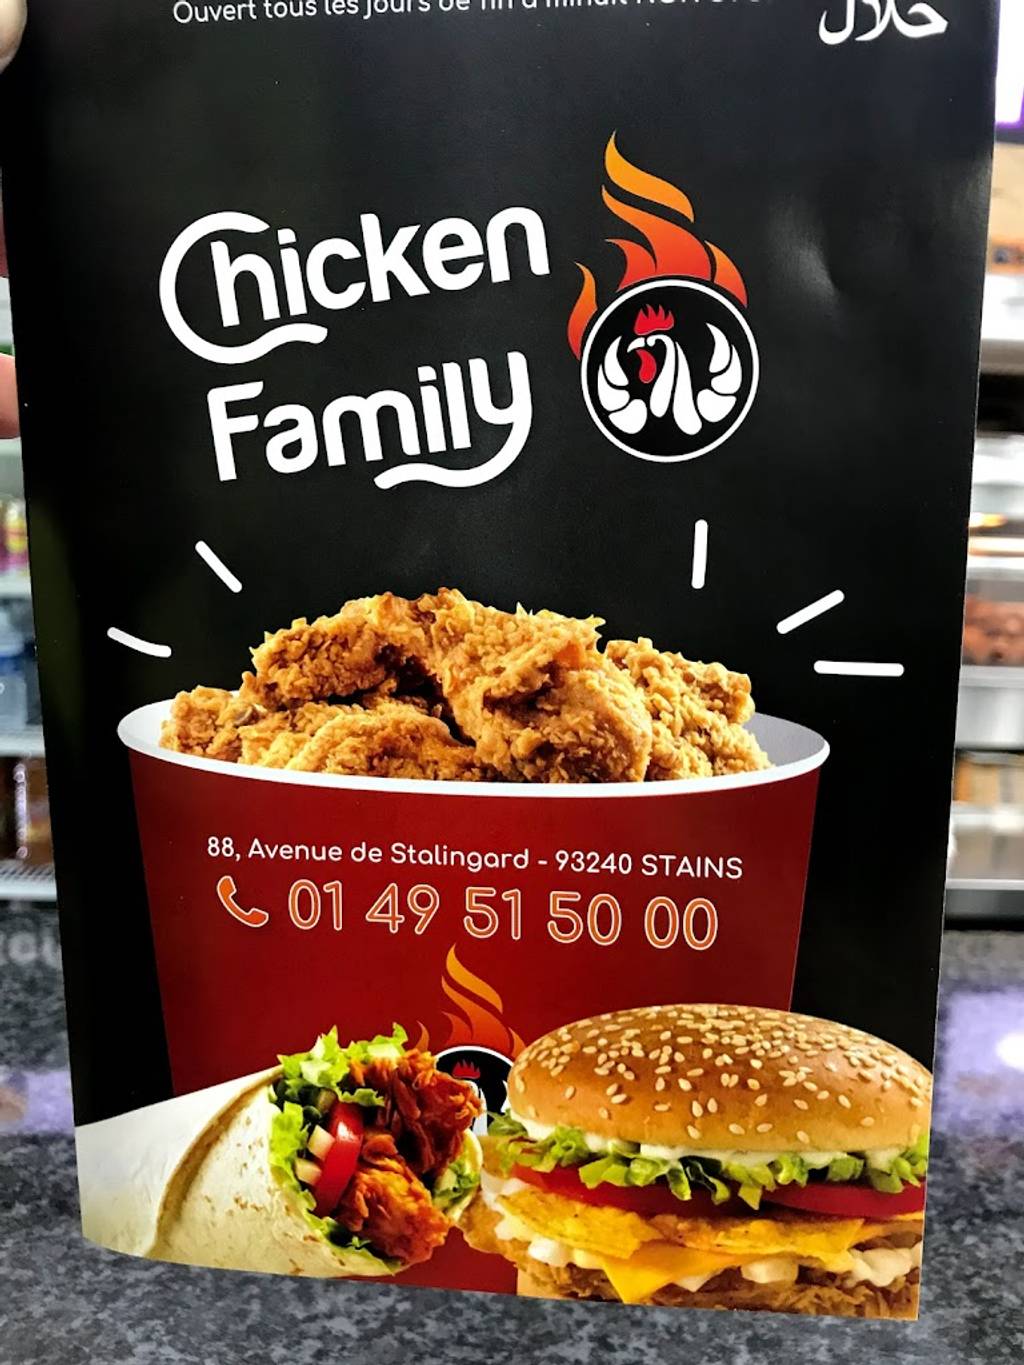 Chicken Family Stains - Food Ingredient Staple food Recipe Fast food